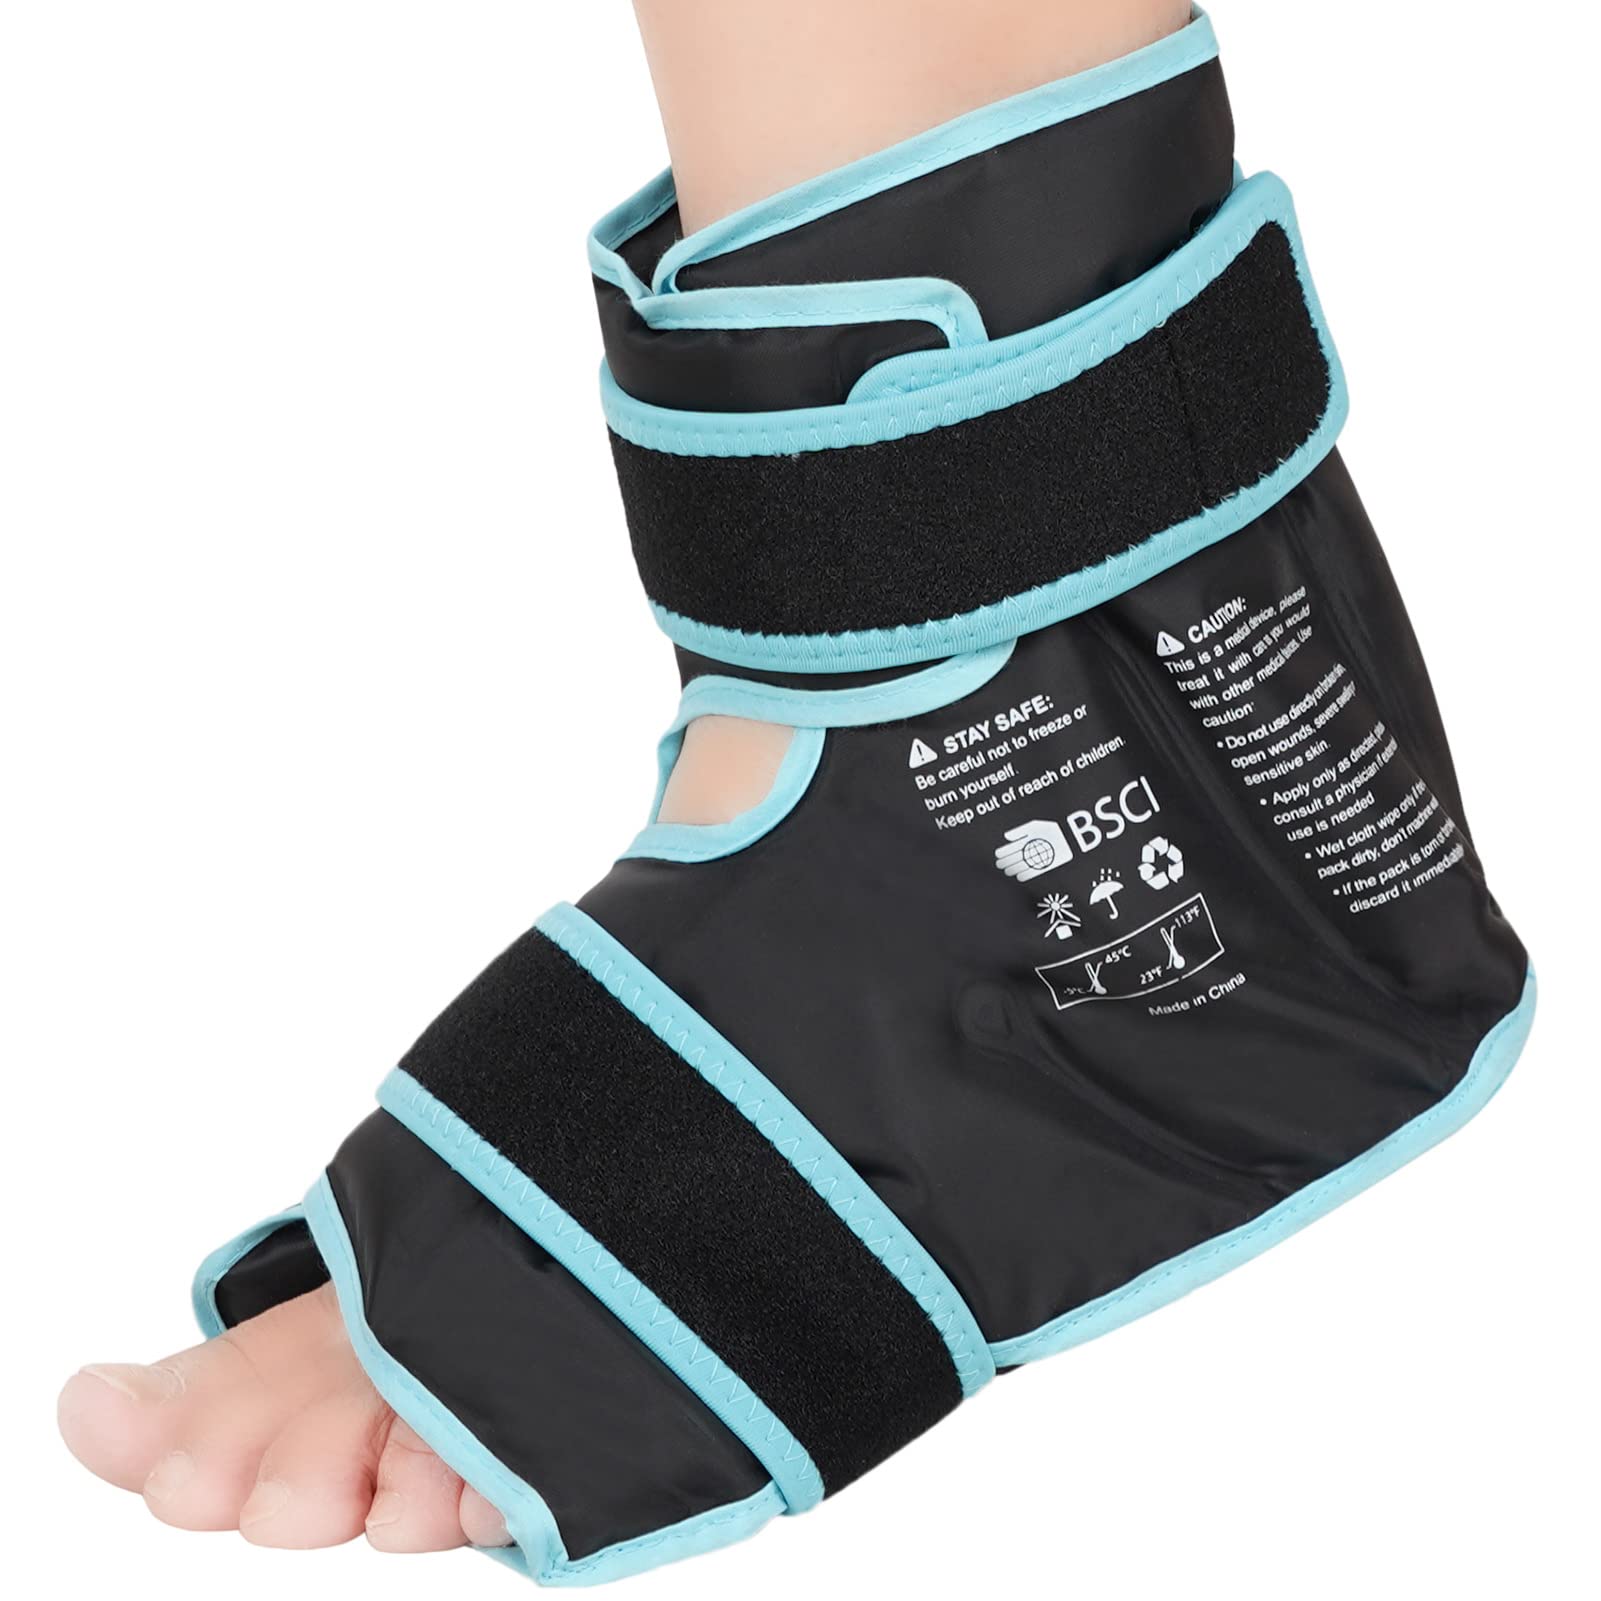 Treating Pain with Compression Therapy